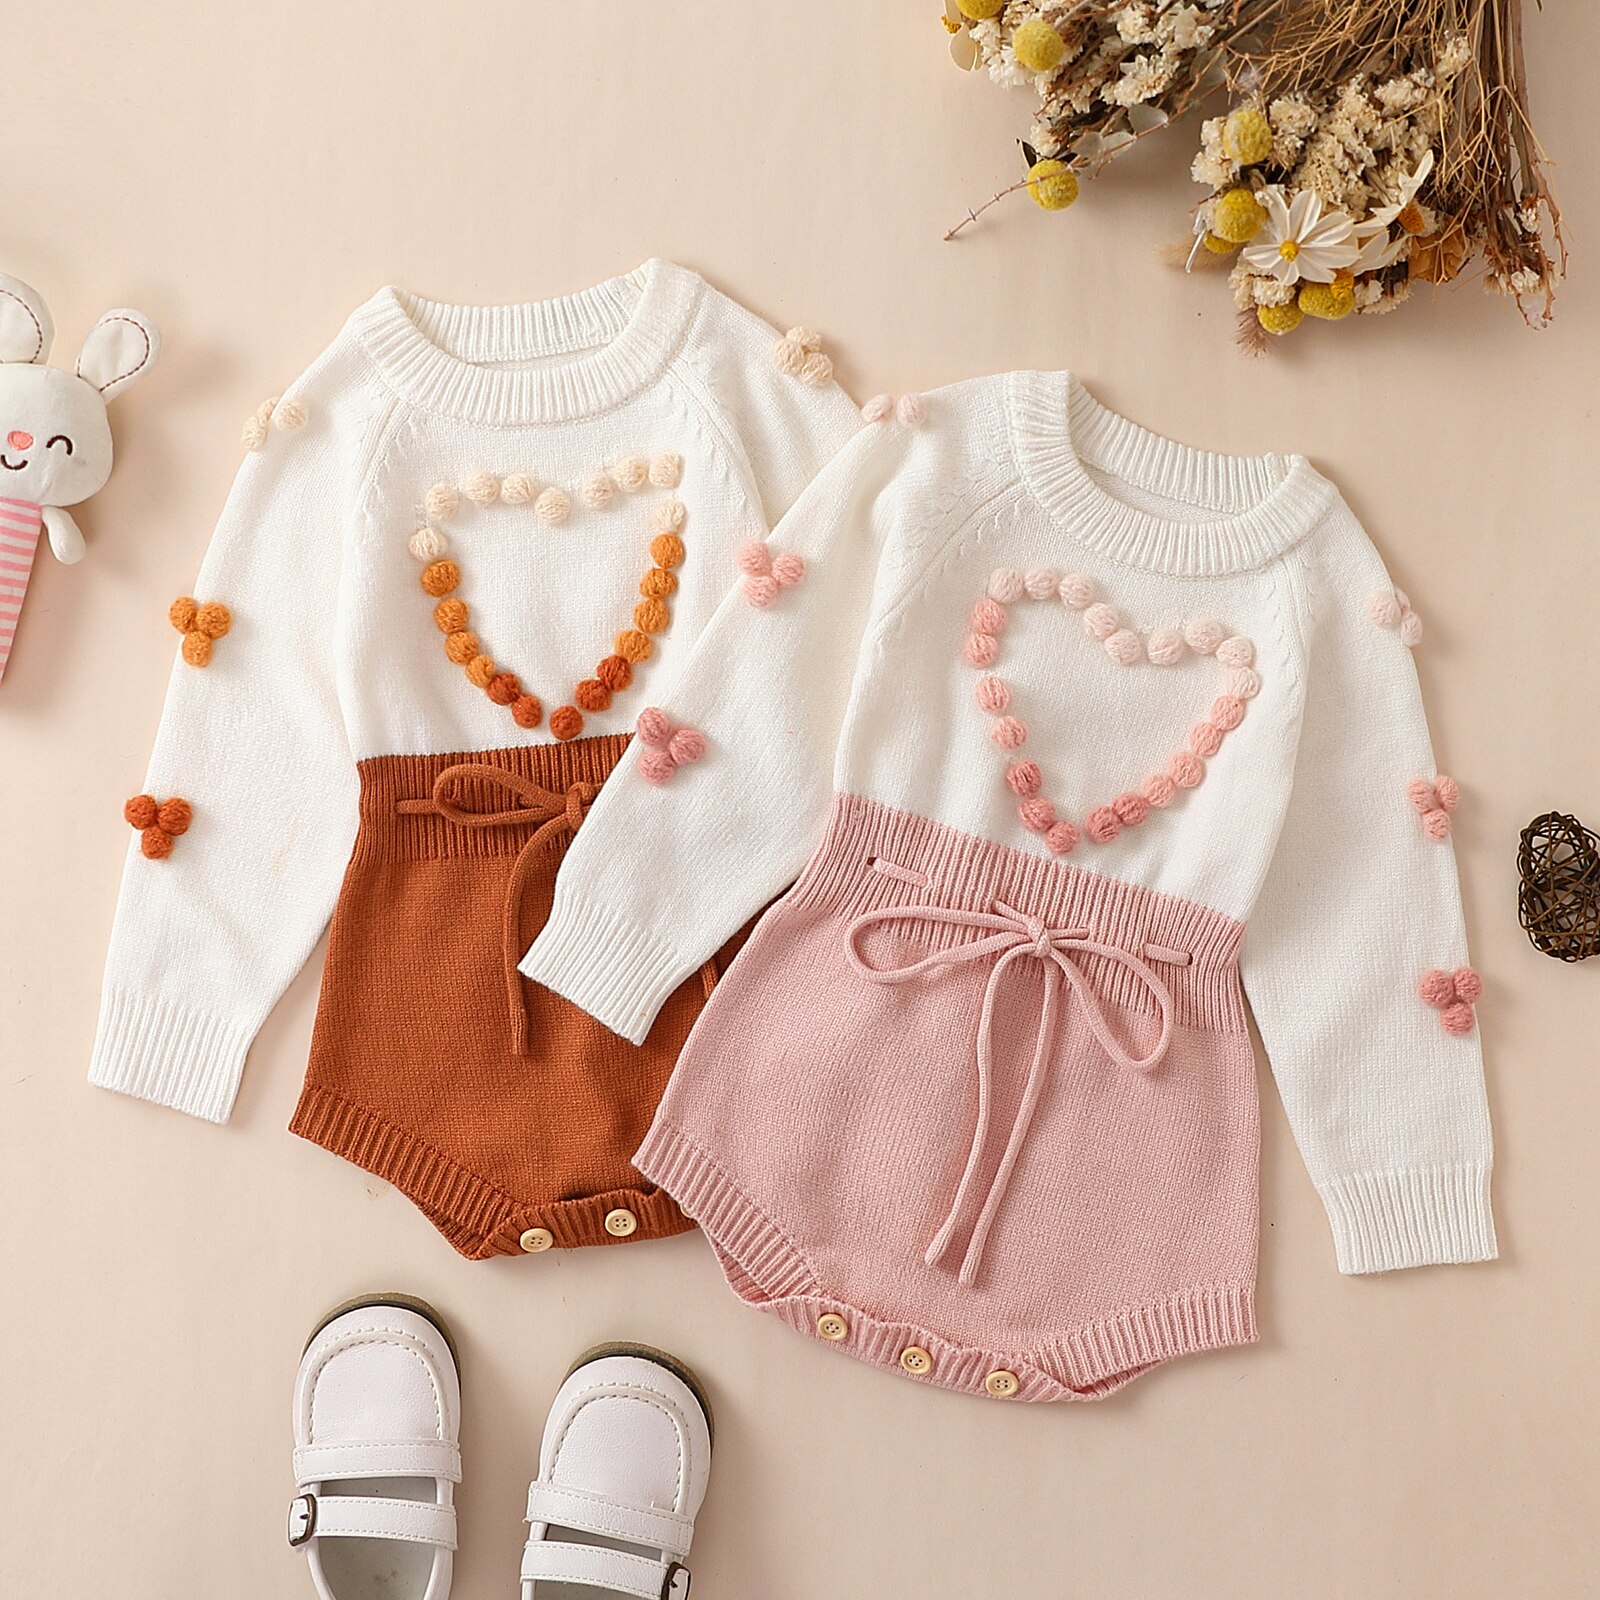 Newborn-Baby-Girls-Sweater-Romper-Autumn-Winter-Knit-Clothes-Long-Sleeve-Contrast-Color-Heart-Crotch-Button-1